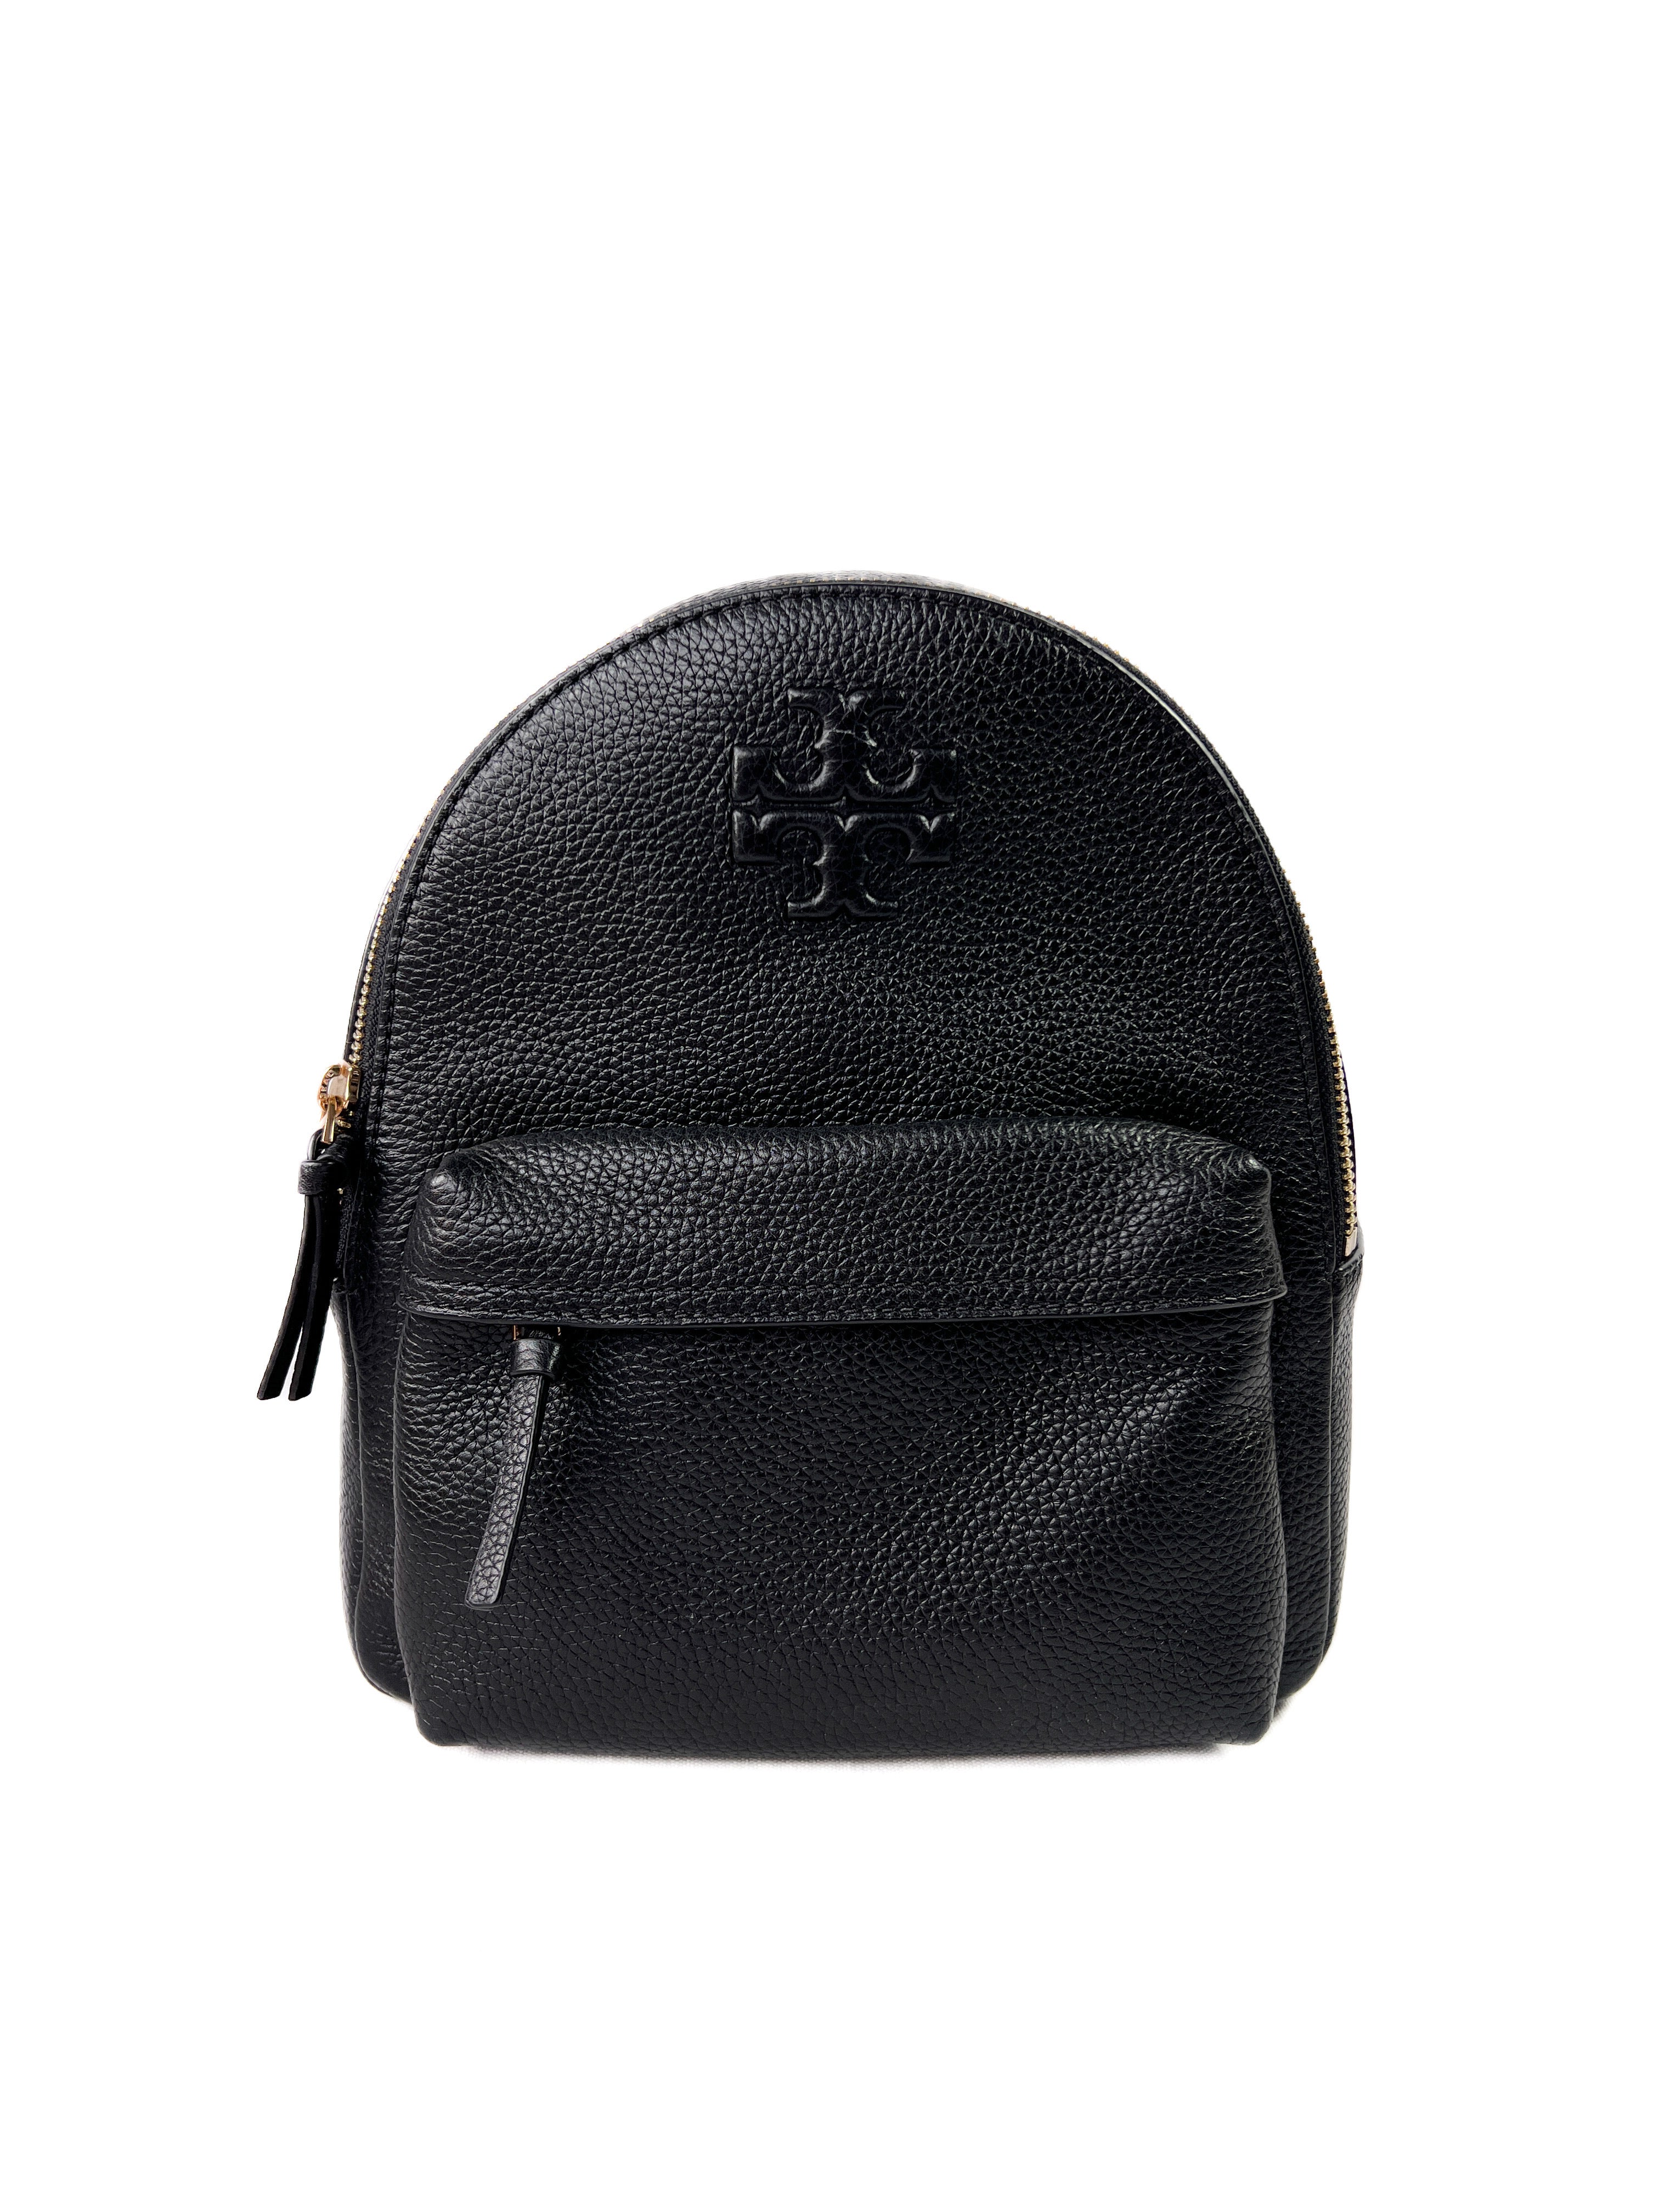 NWT AUTH Tory Burch Thea Mini Top Handle Leather Backpack Royal